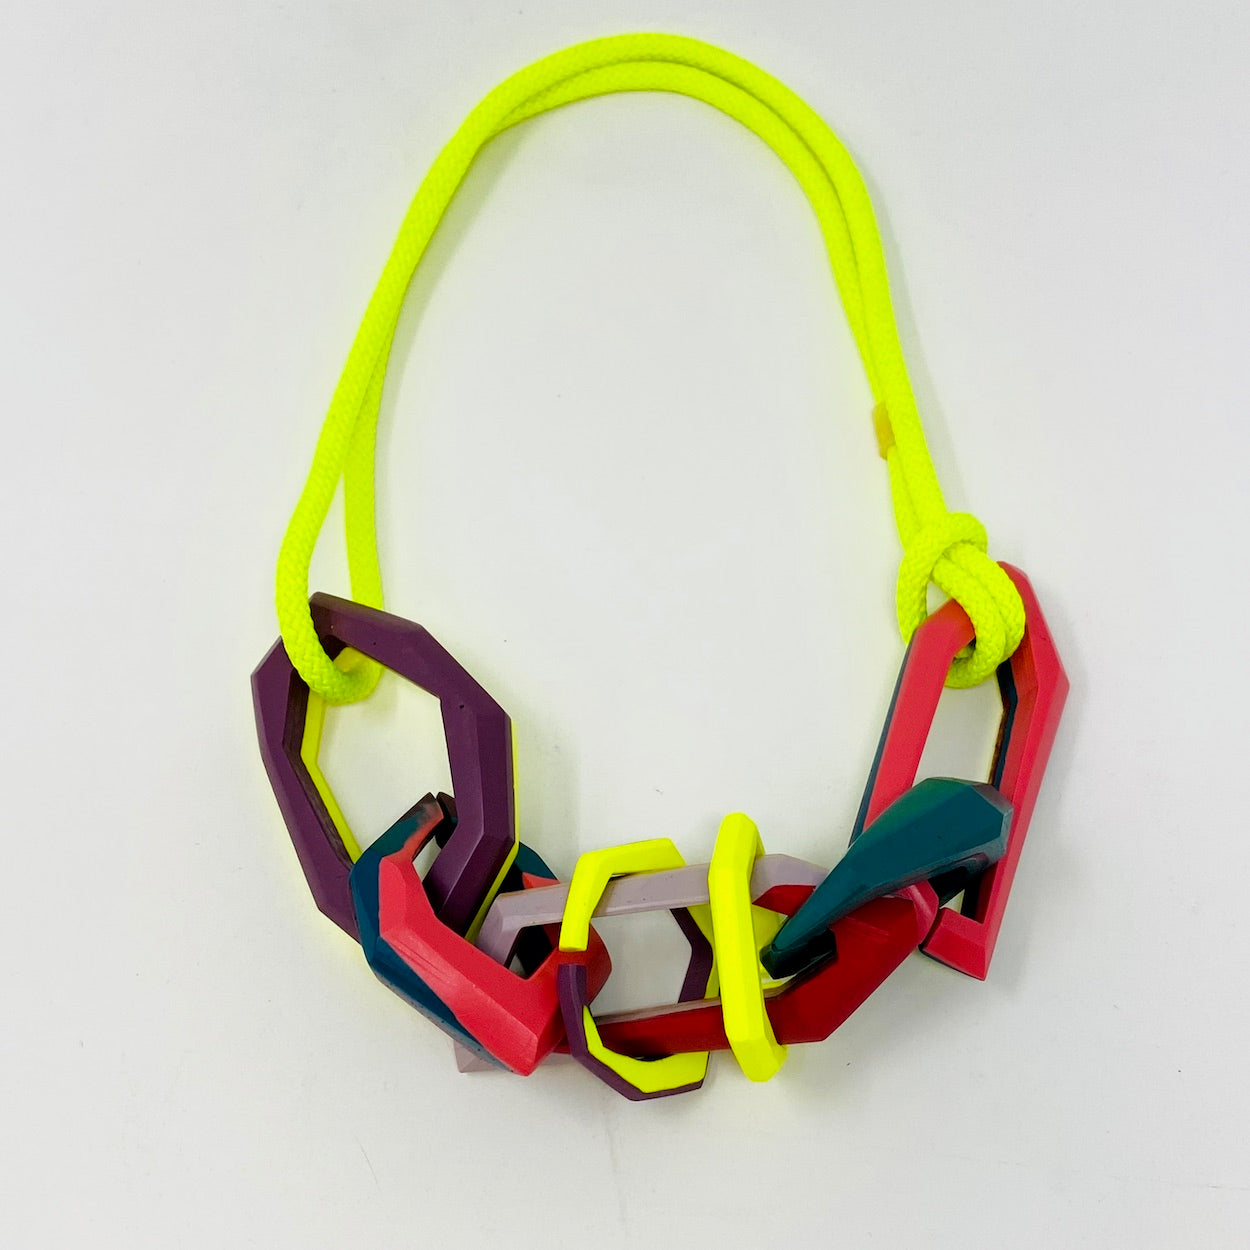 Maca Links Necklace, Fluro yellow, pinks and greens